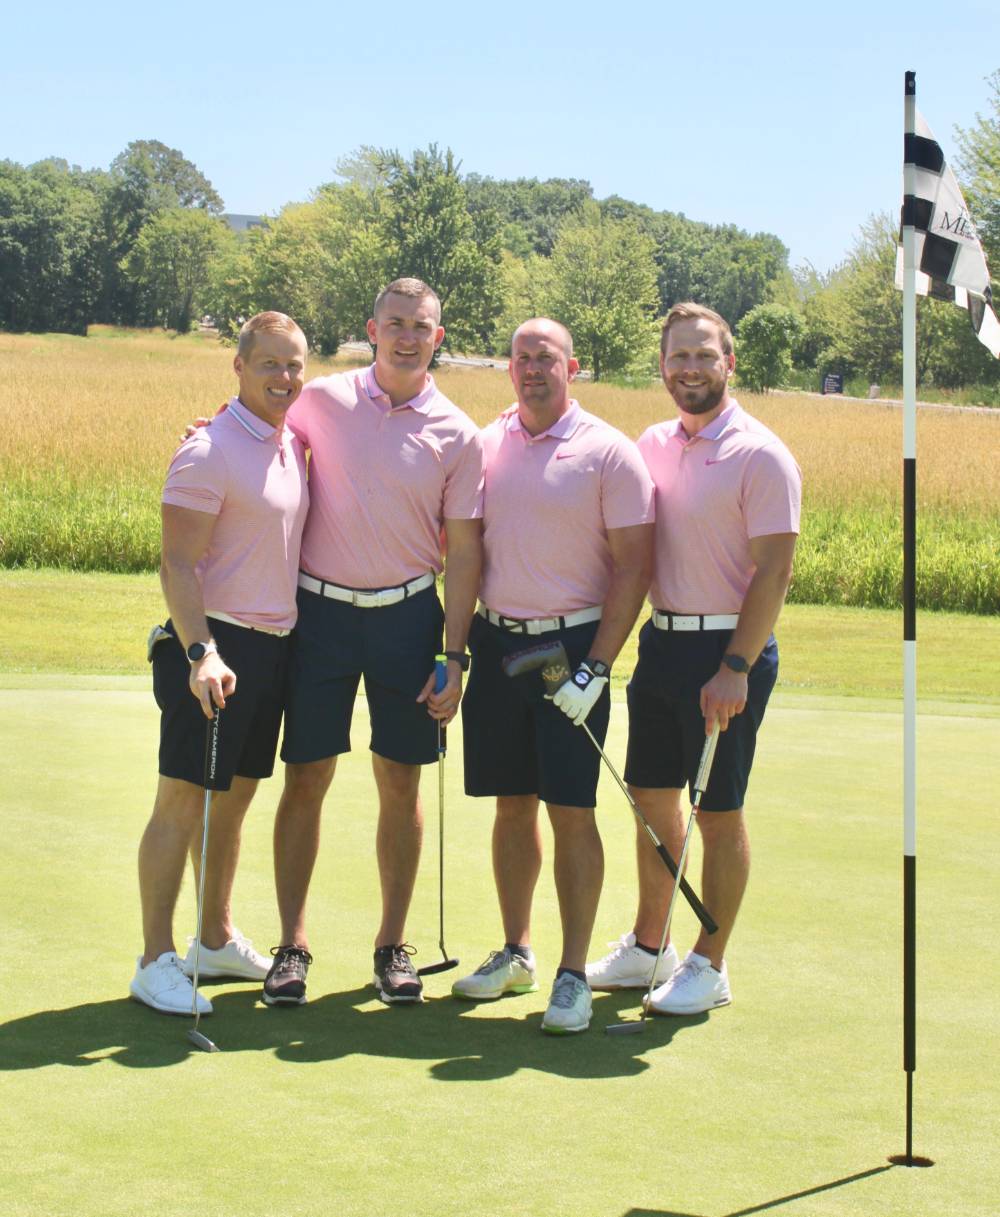 4 team members pose for a picture on the green in pink shirts